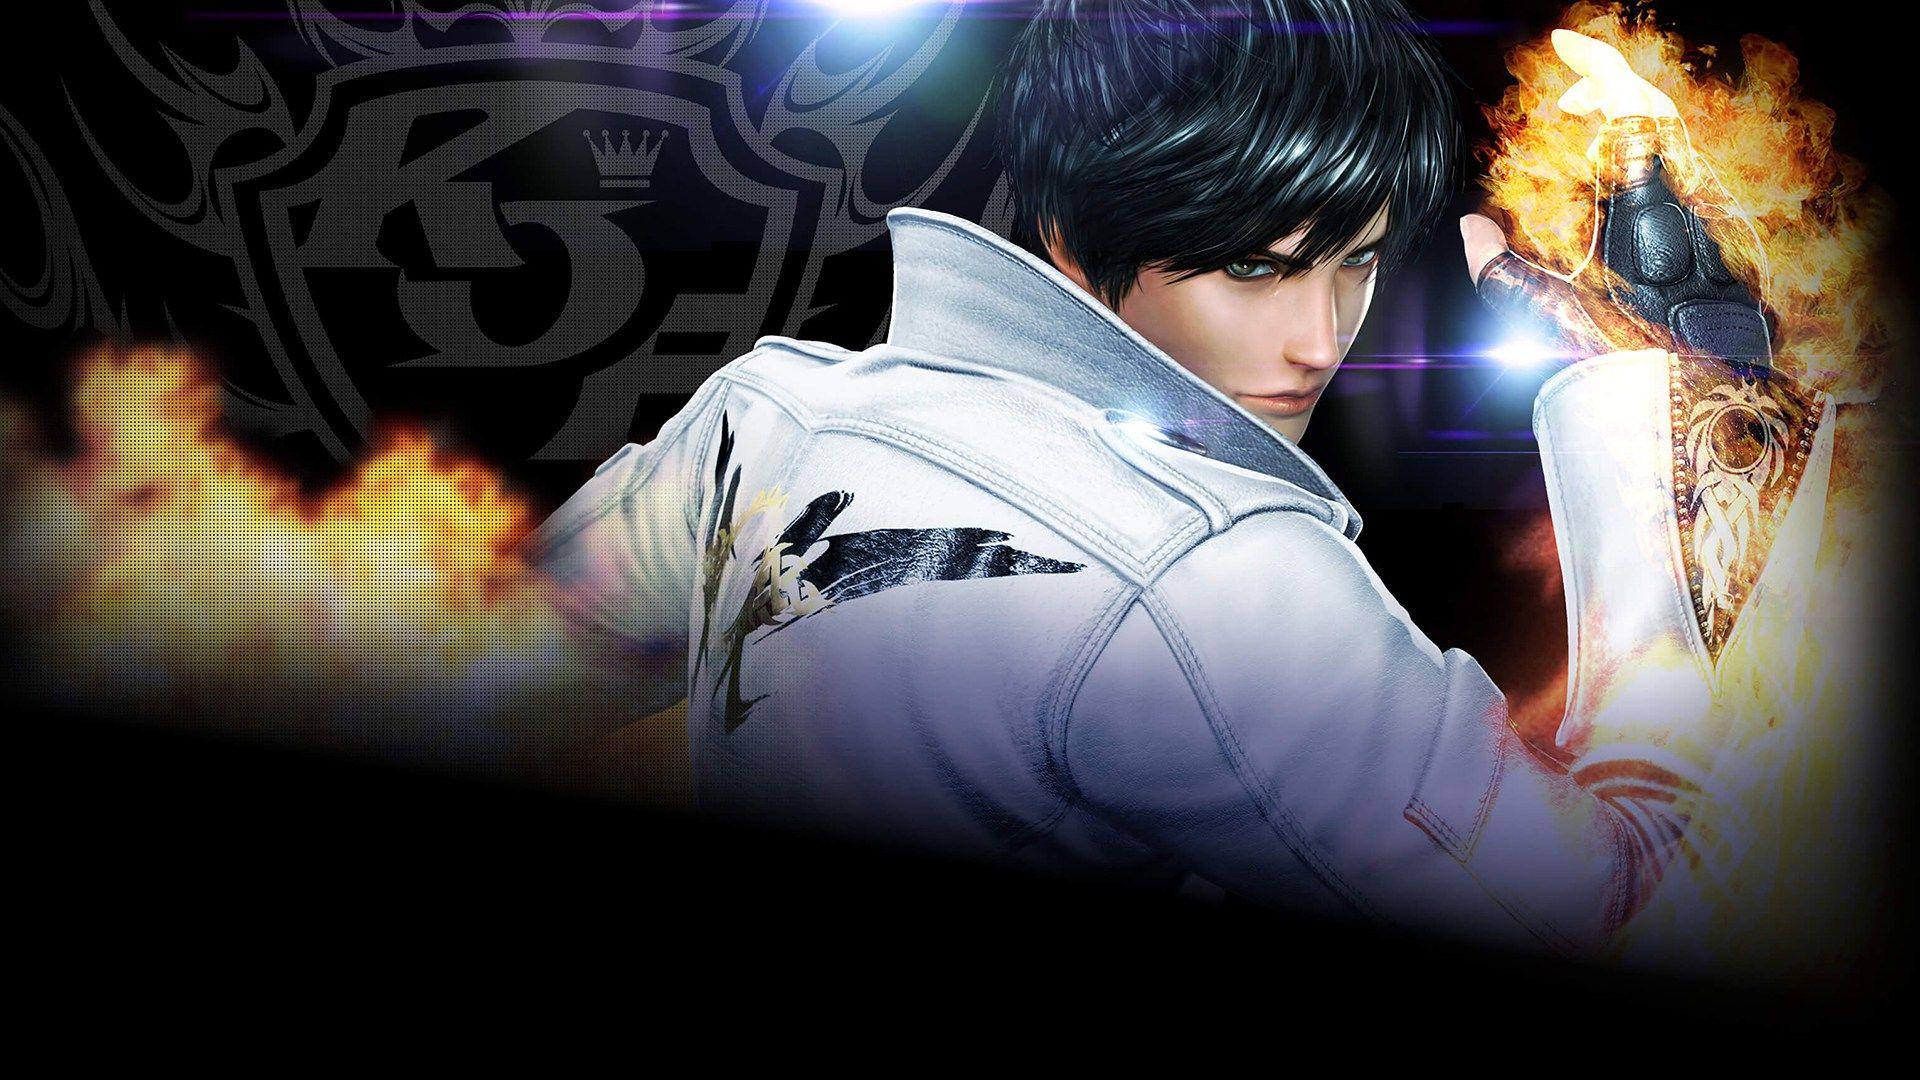 Kyo Kusanagi, The King of Fighters (KOF), The King of Fighters XIV